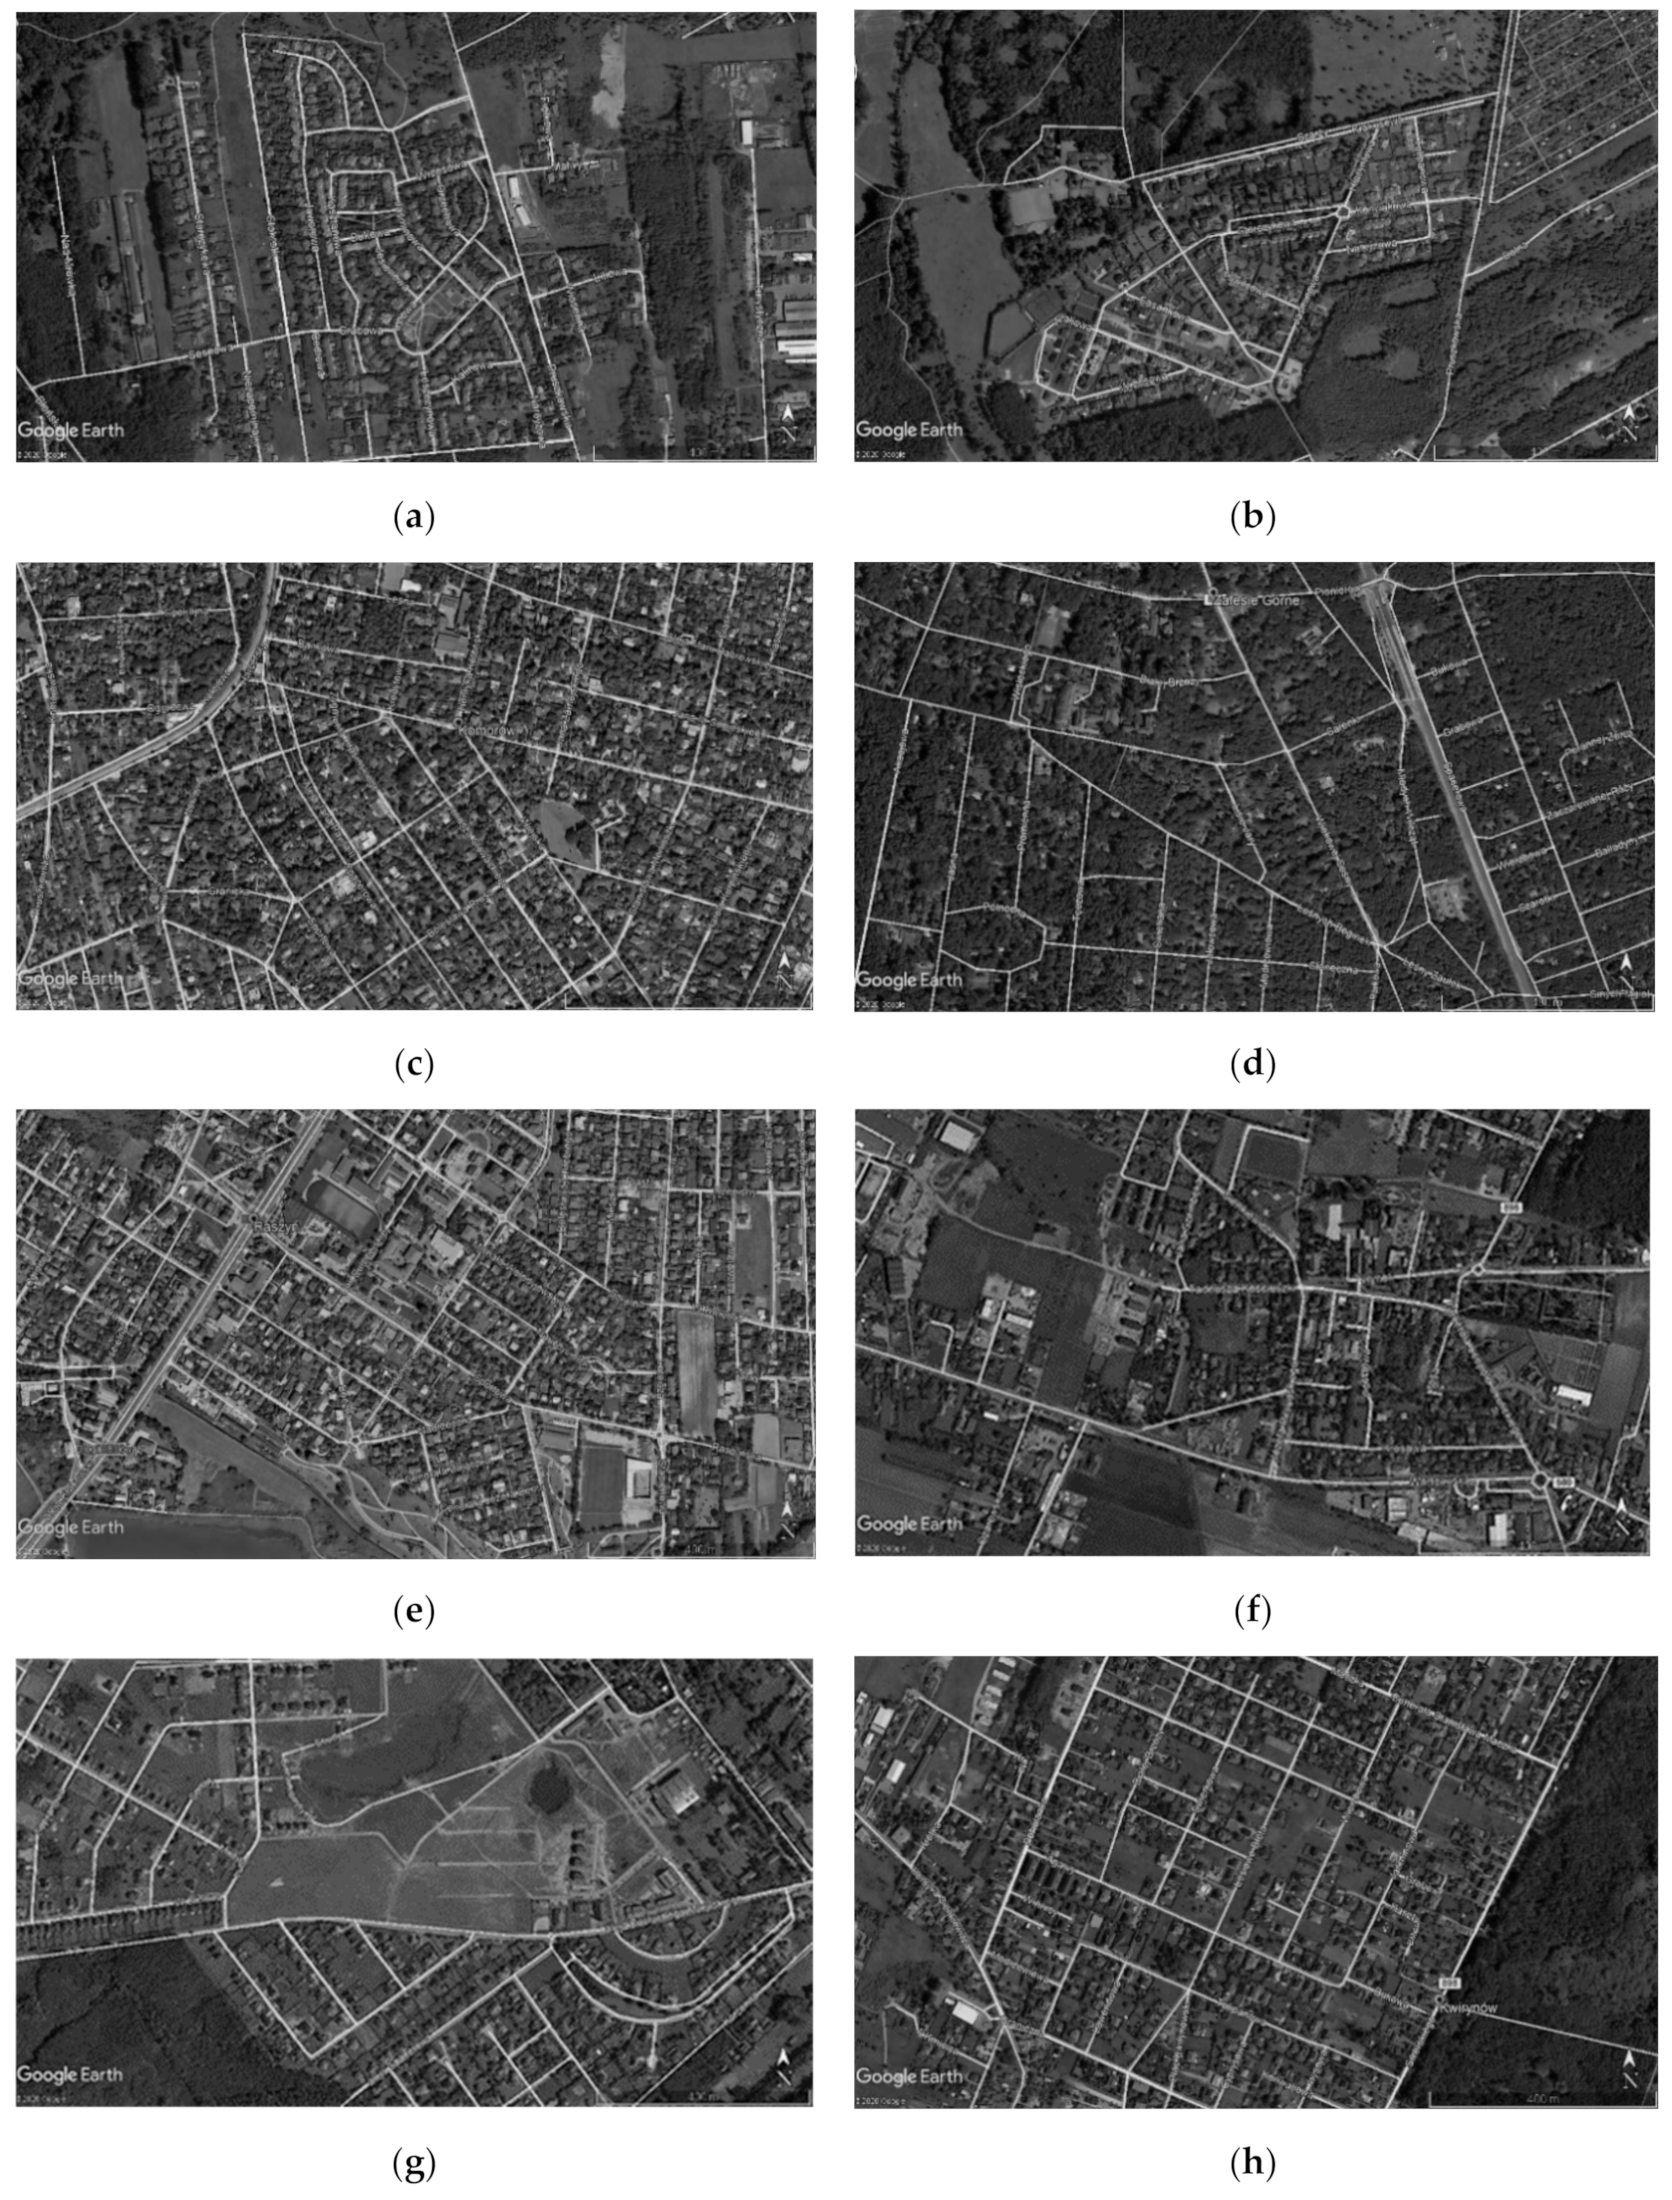 Sustainability Free Full-Text Models of Community-Friendly Recreational Public Space in Warsaw Suburbs